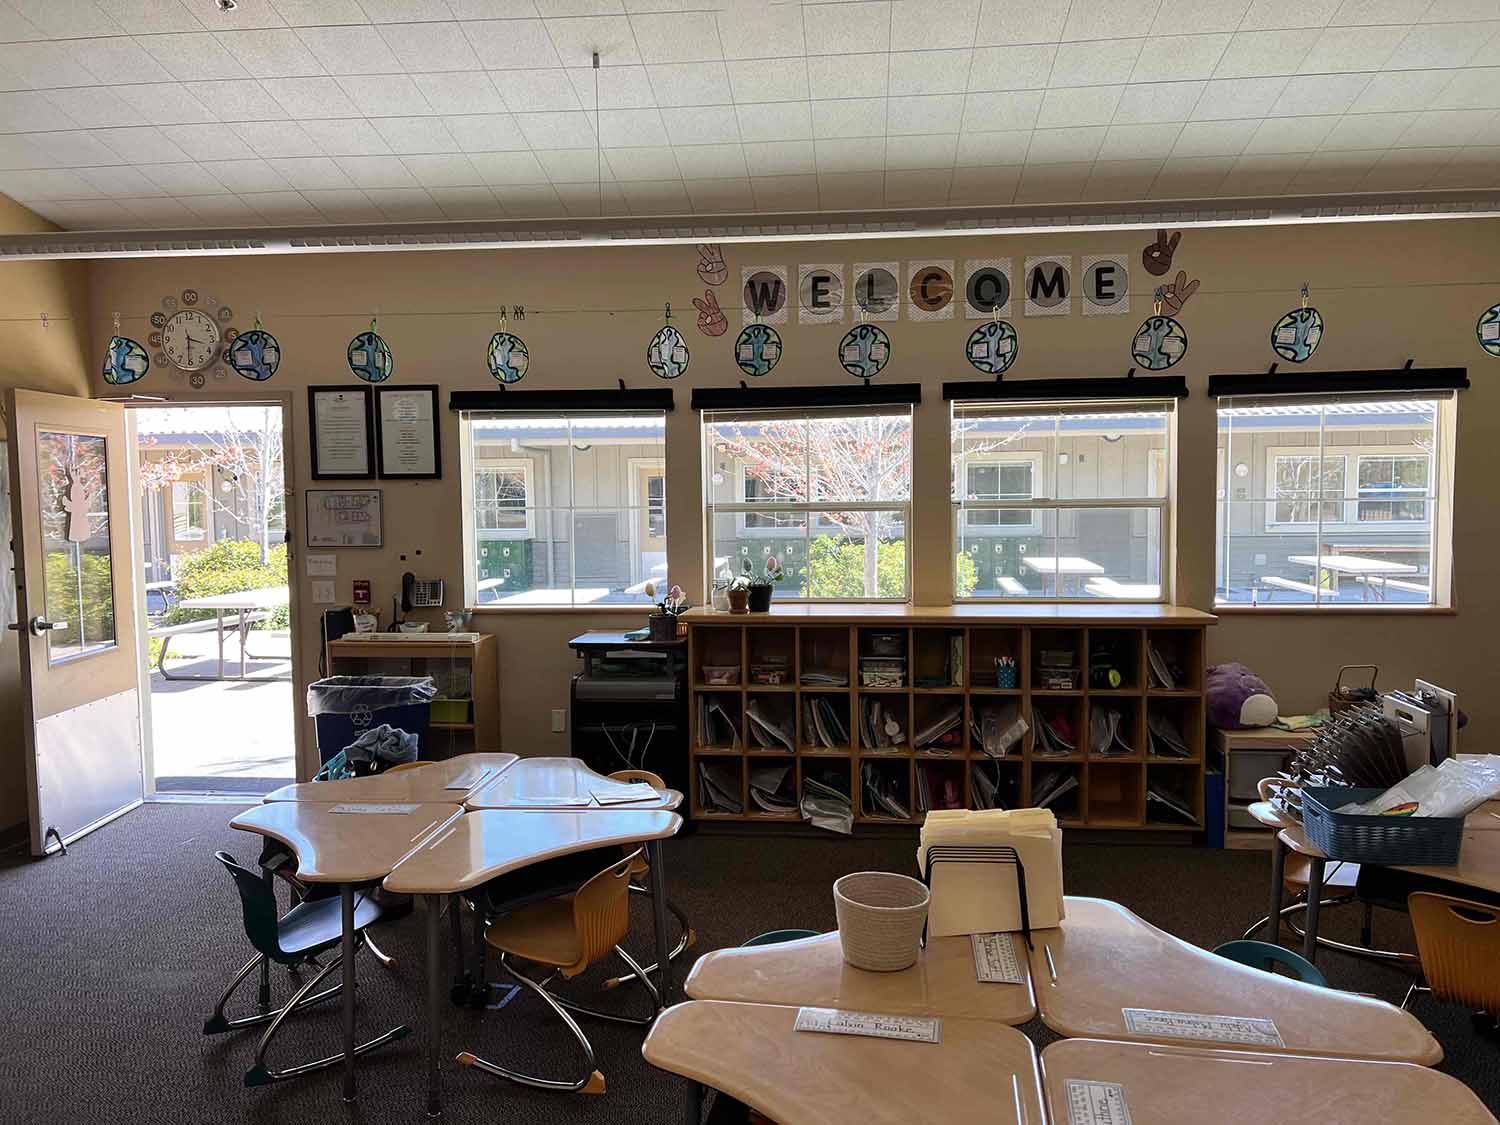 3M Safety Window Film For Schools in Sonoma. Get a free estimate for your school from the Bay Area's authorized 3M Window Film Dealer, ClimatePro.